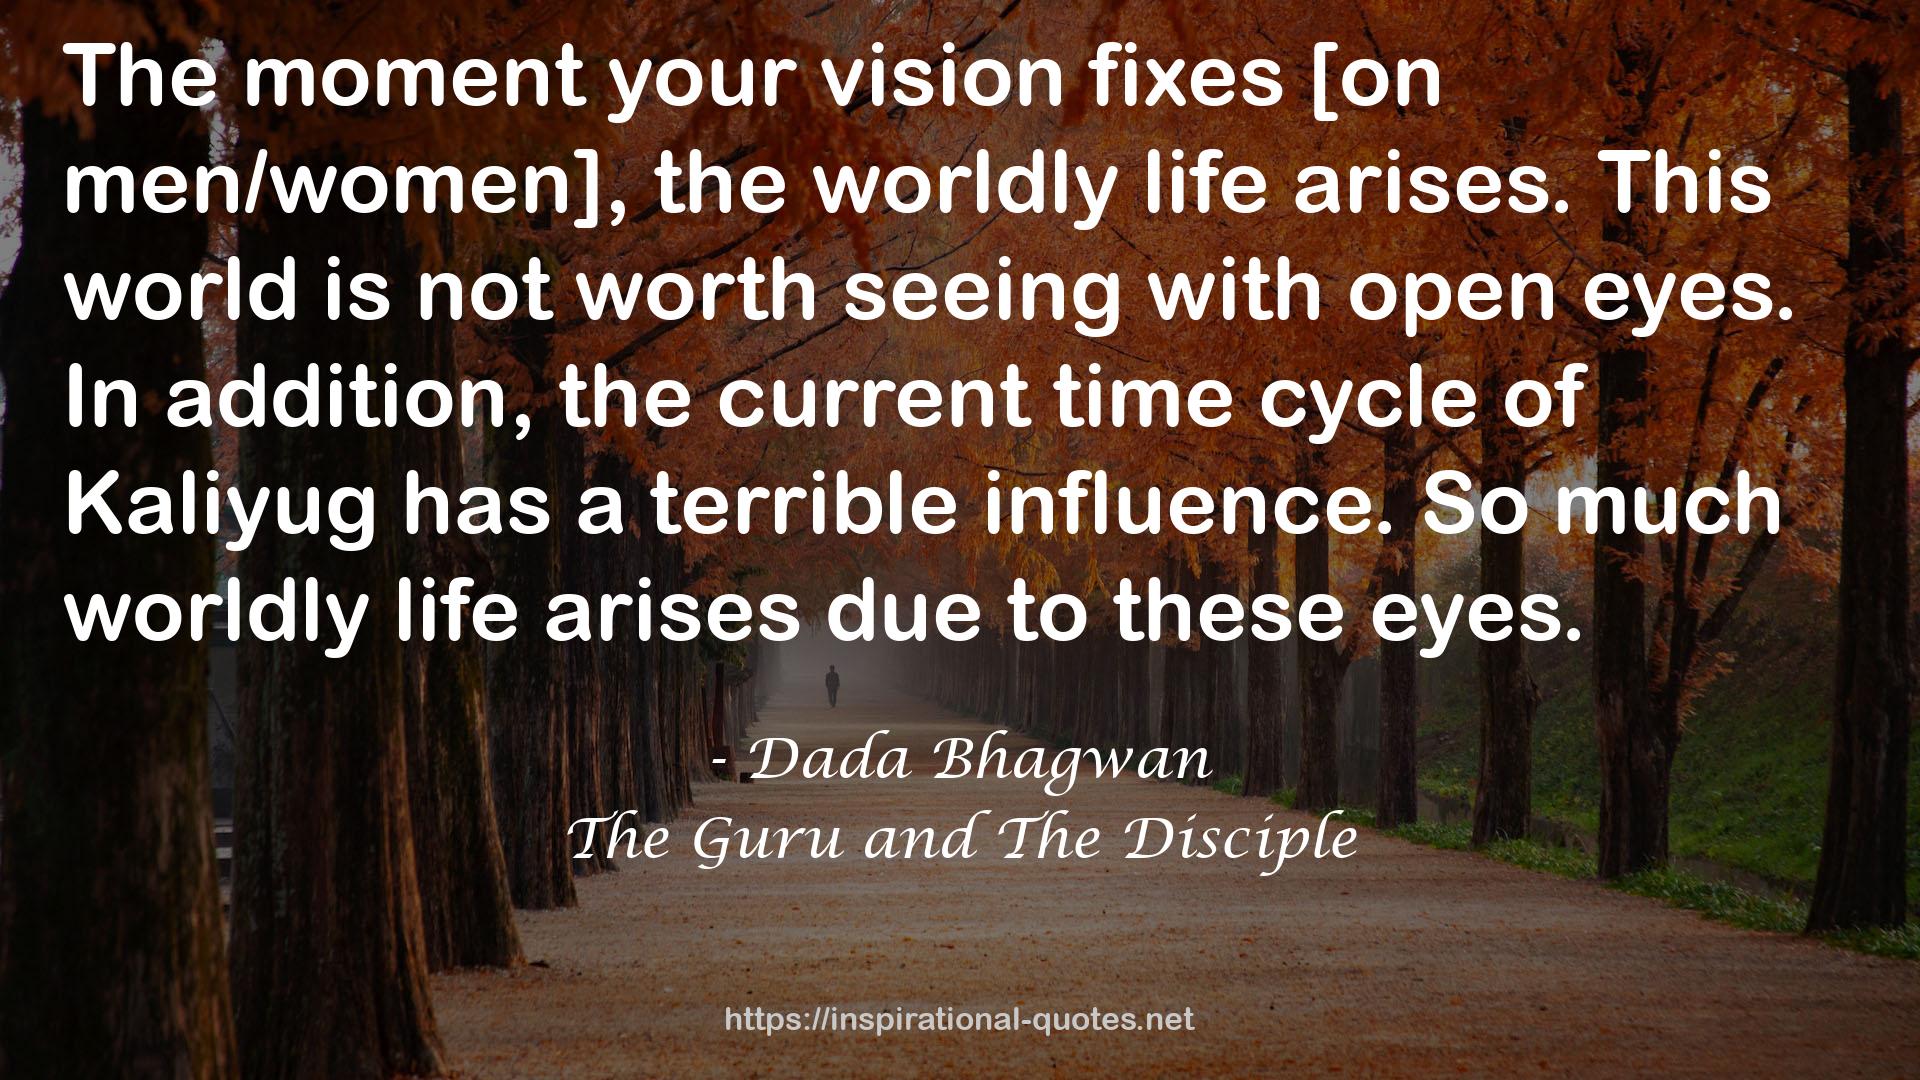 The Guru and The Disciple QUOTES